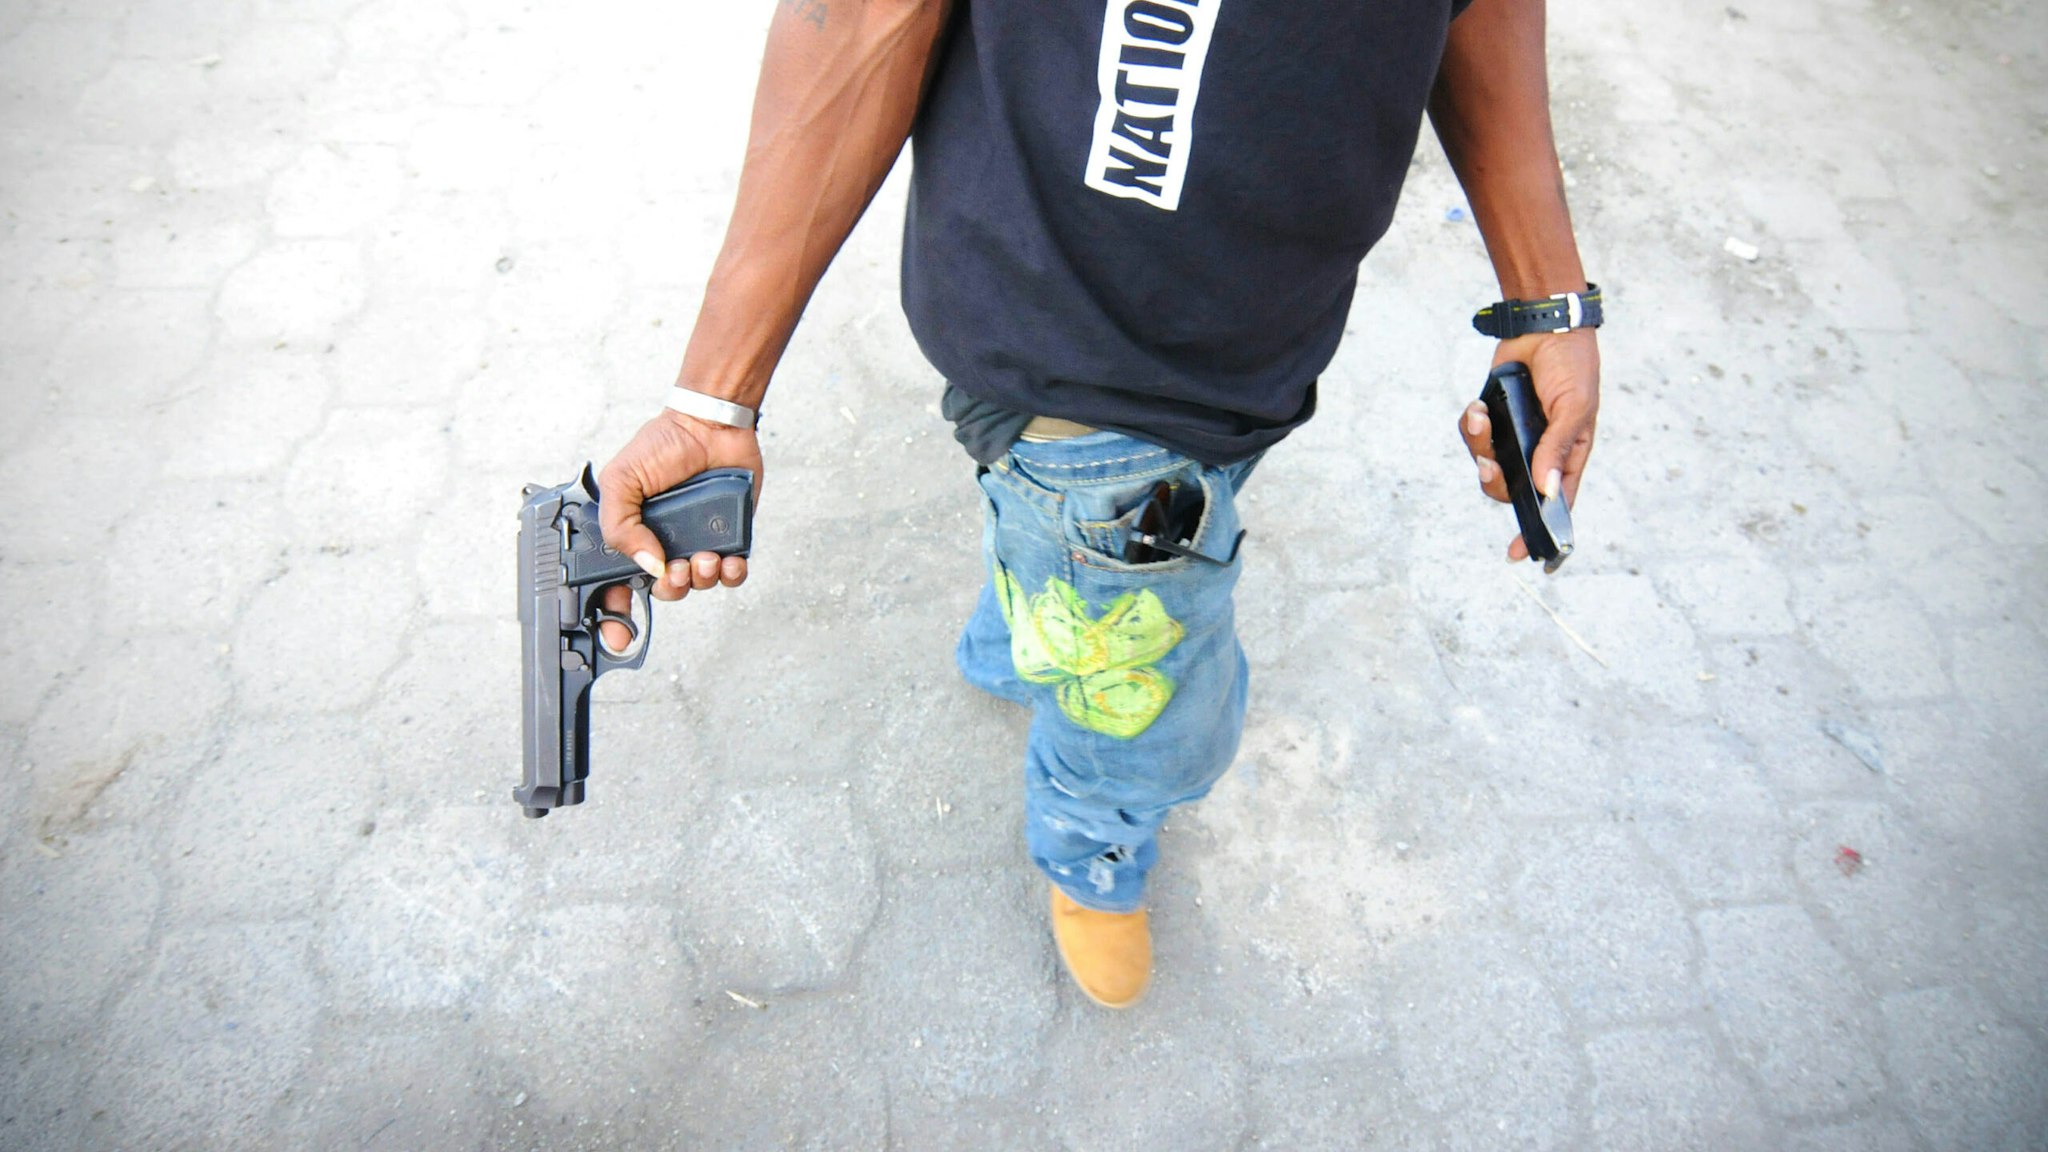 (GERMANY OUT) Port-au-Prince, Haiti. The slum Cite Soleil is known to be the battleground between gangs who settle scores and against UN troops who have on numerous occasions tried to pacify the area. A gang member connected with the LP Street gang is arming his pistol.